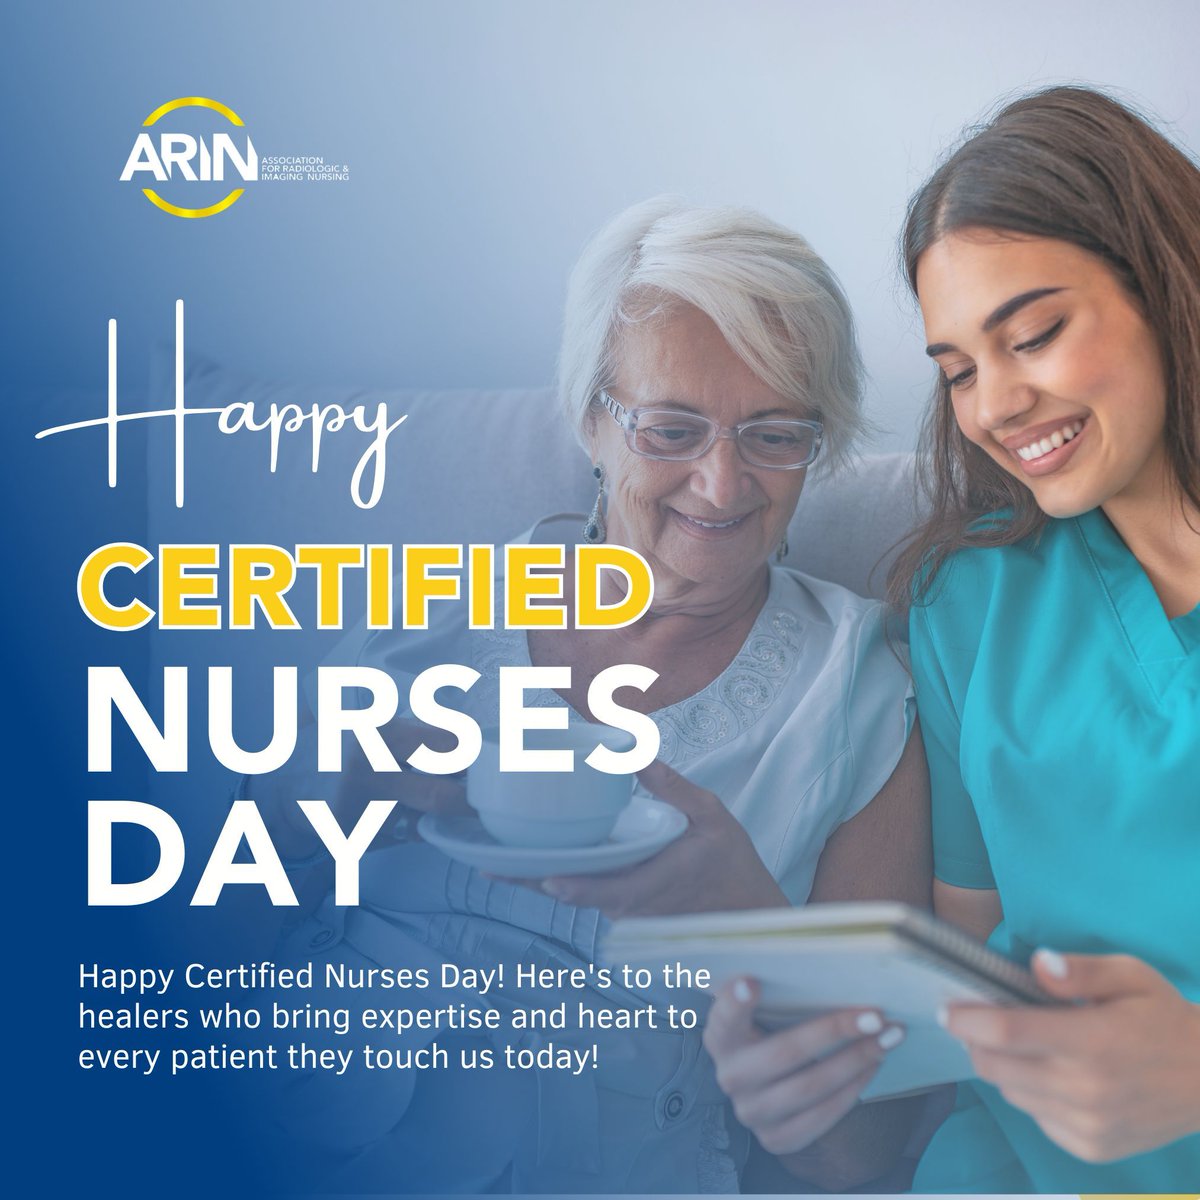 Happy Certified Nurses Day! Thank you for embodying excellence in patient care worldwide. Your dedication inspires us all. Here's to making a positive impact every day!  Learn more -> buff.ly/3UBLq4R  #CertifiedNursesDay #PatientCareExcellence